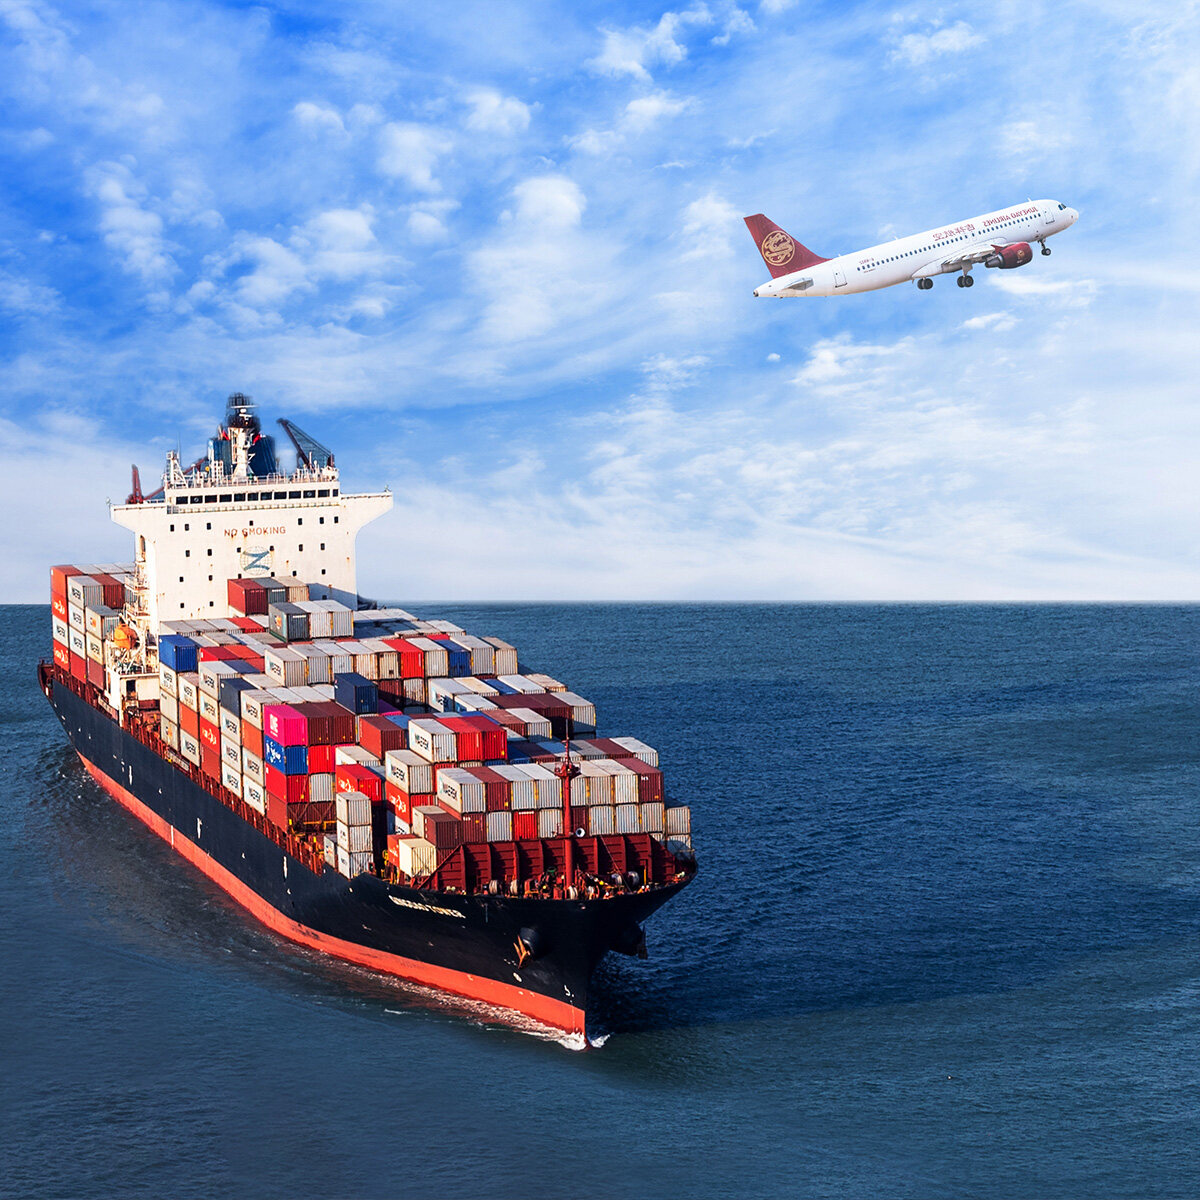 International Sea freight Forwarder service from China to Europe